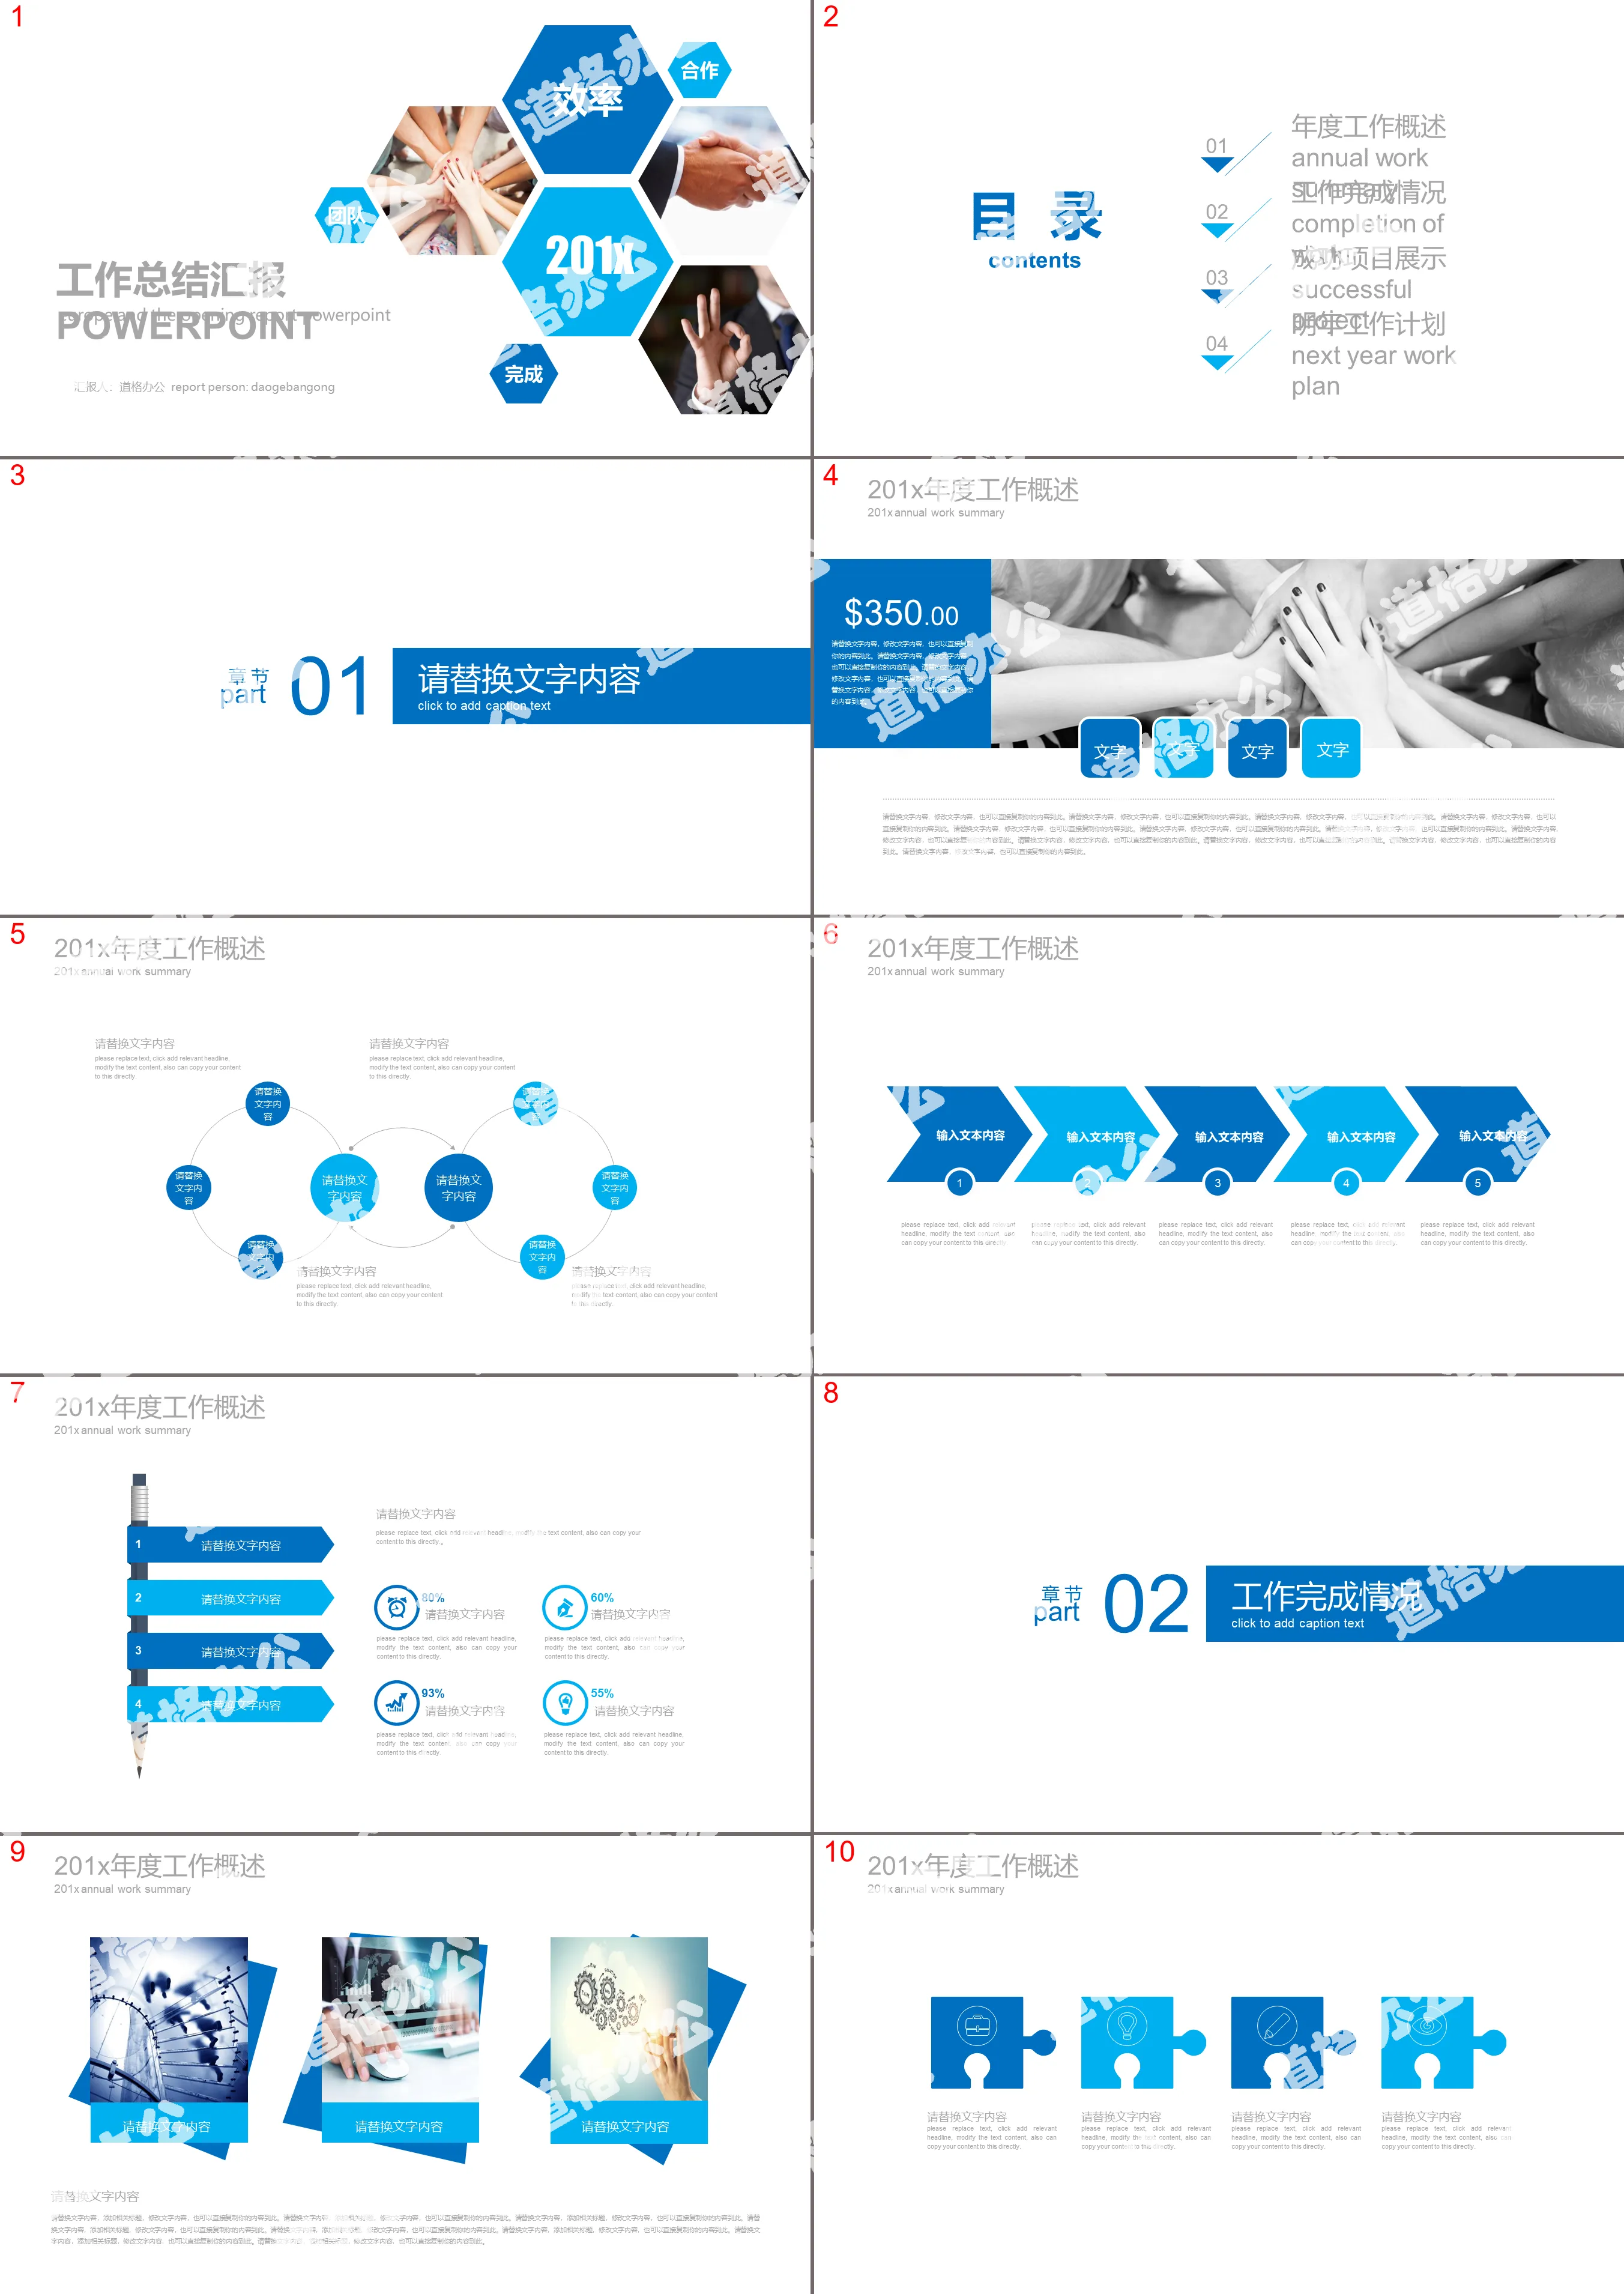 Work summary report PPT template mixed with blue hexagons and pictures